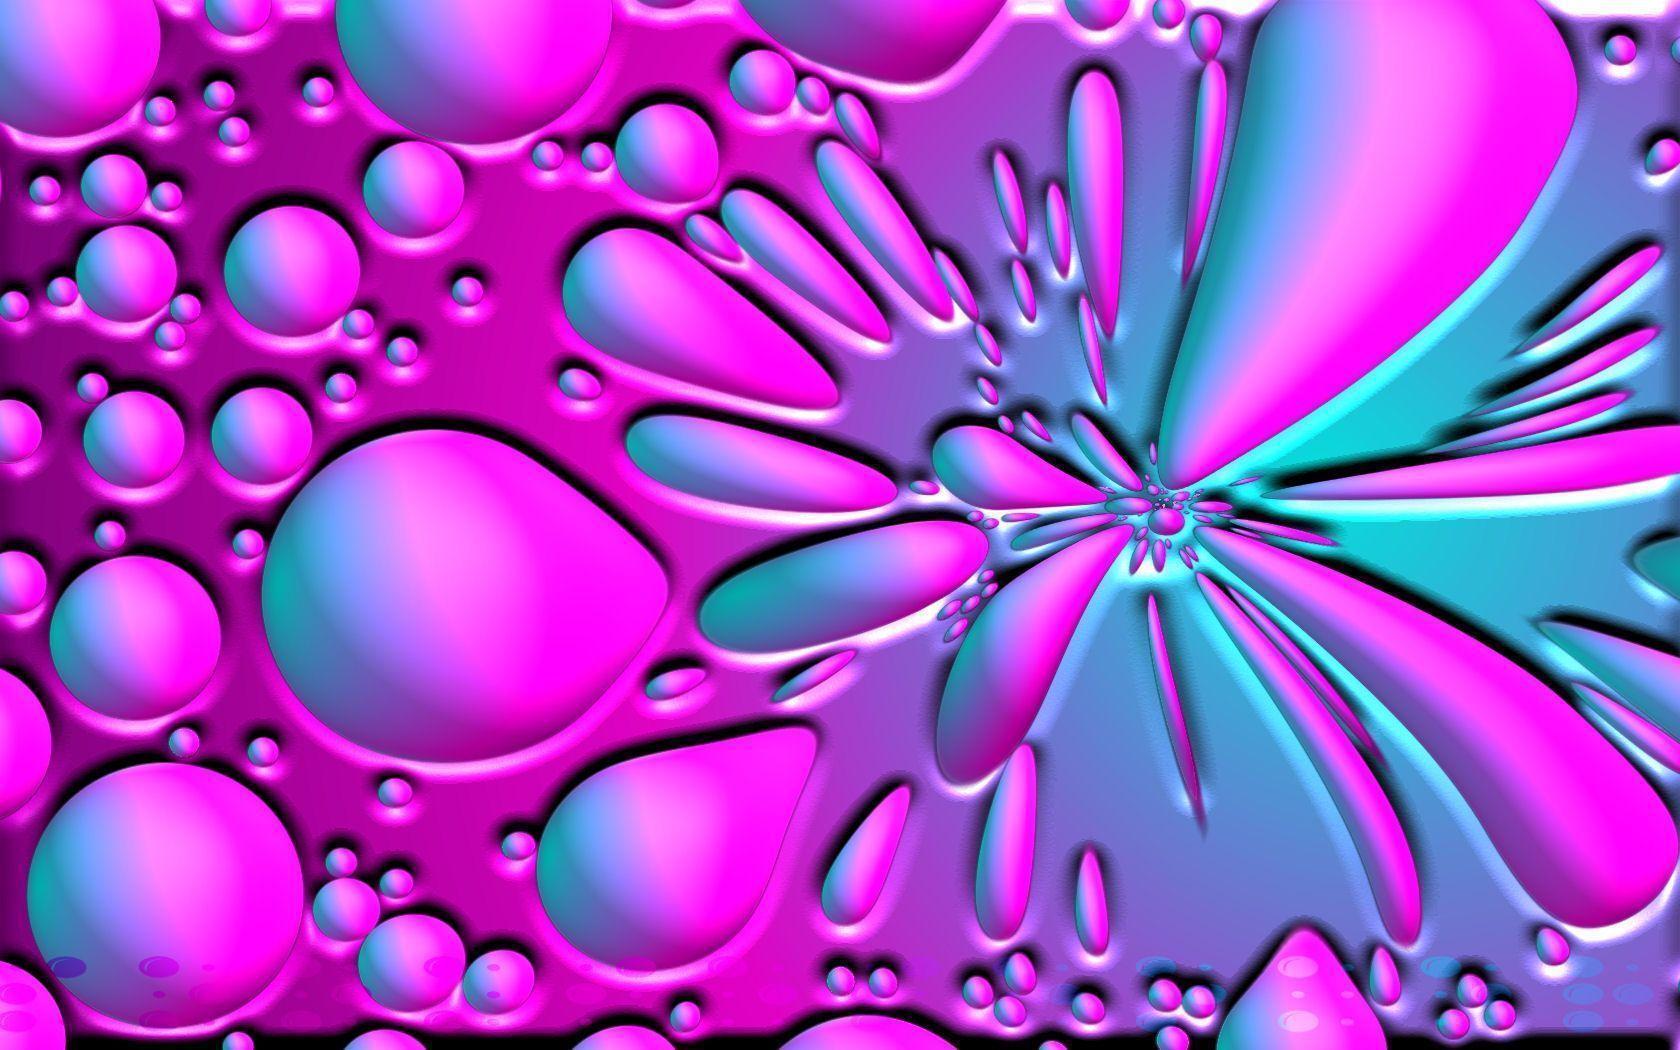 More Like Pink and Blue Bubble Wallpaper